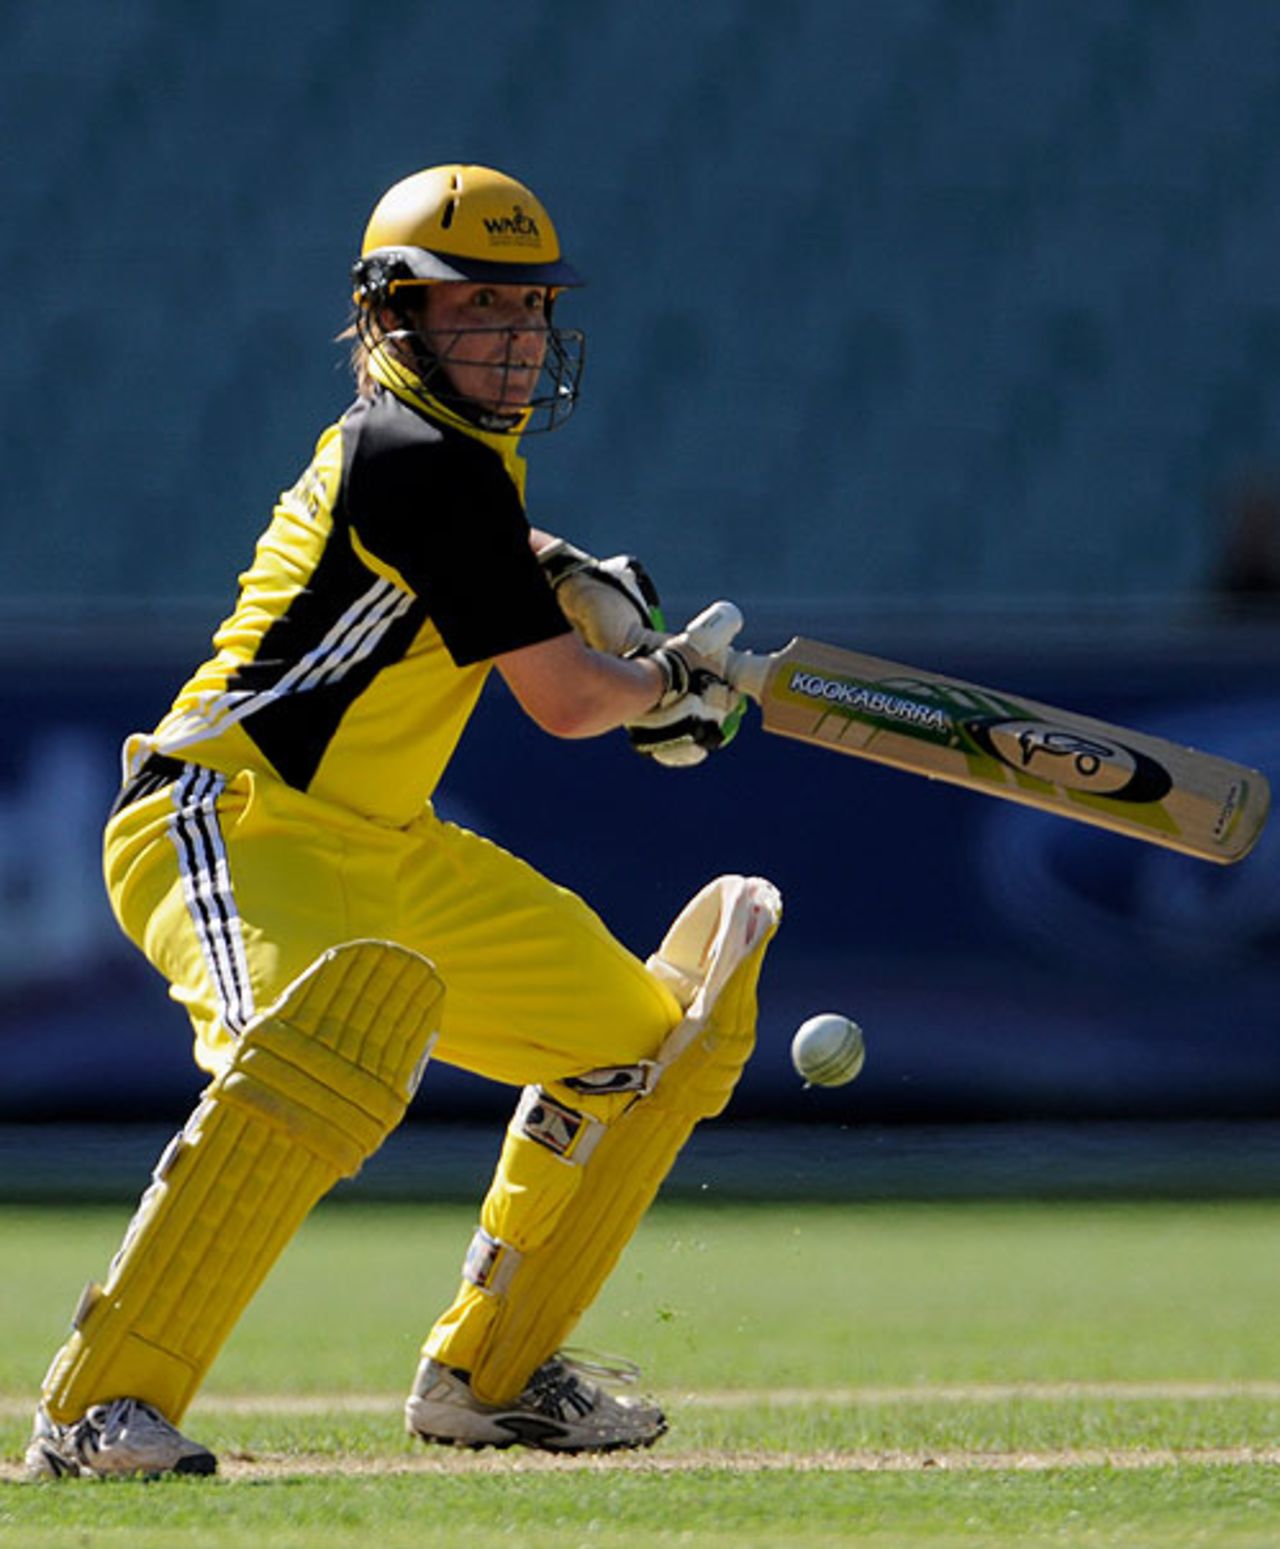 Lauren Stammers hits a shot during the Women's Twenty20 match between the Victoria Women and Western Australia Women held at the Melbourne Cricket Ground January 8, 2009.